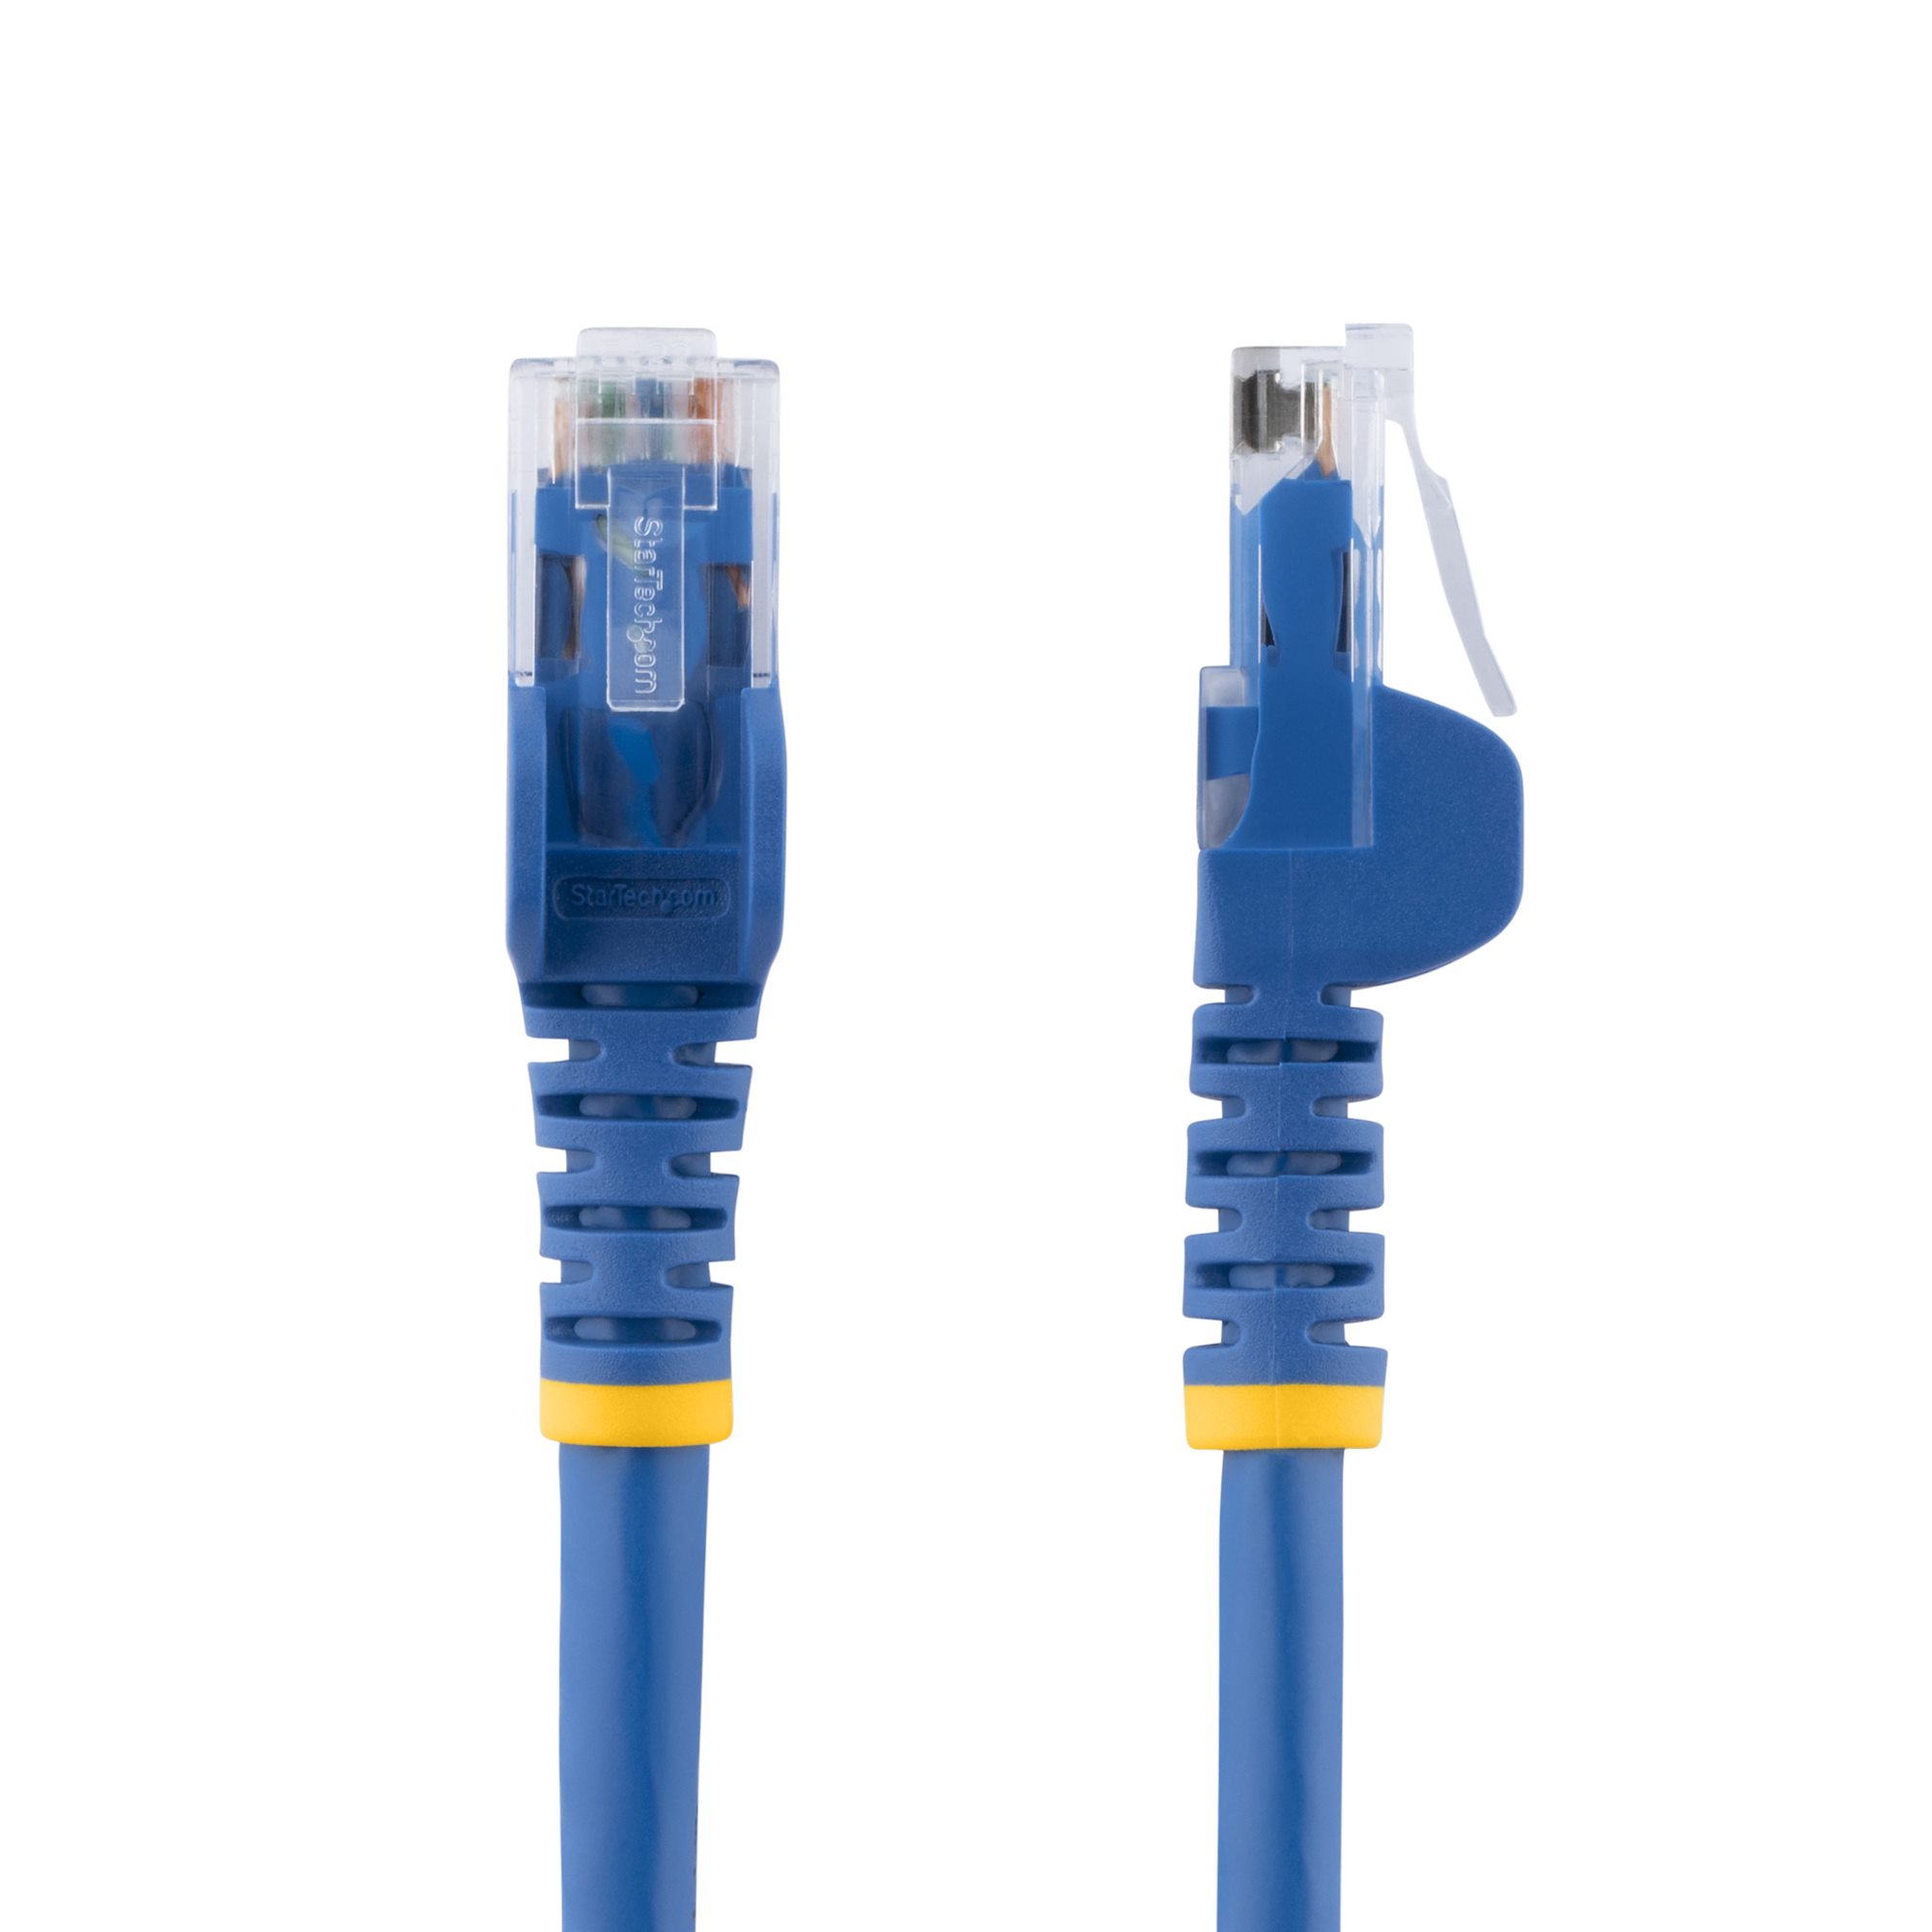 15 ft. CAT6 Ethernet cable - 10 Pack - ETL Verified - Blue CAT6 Patch Cord  - Snagless RJ45 Connectors - 24 AWG Copper Wire – UTP Ethernet Cable